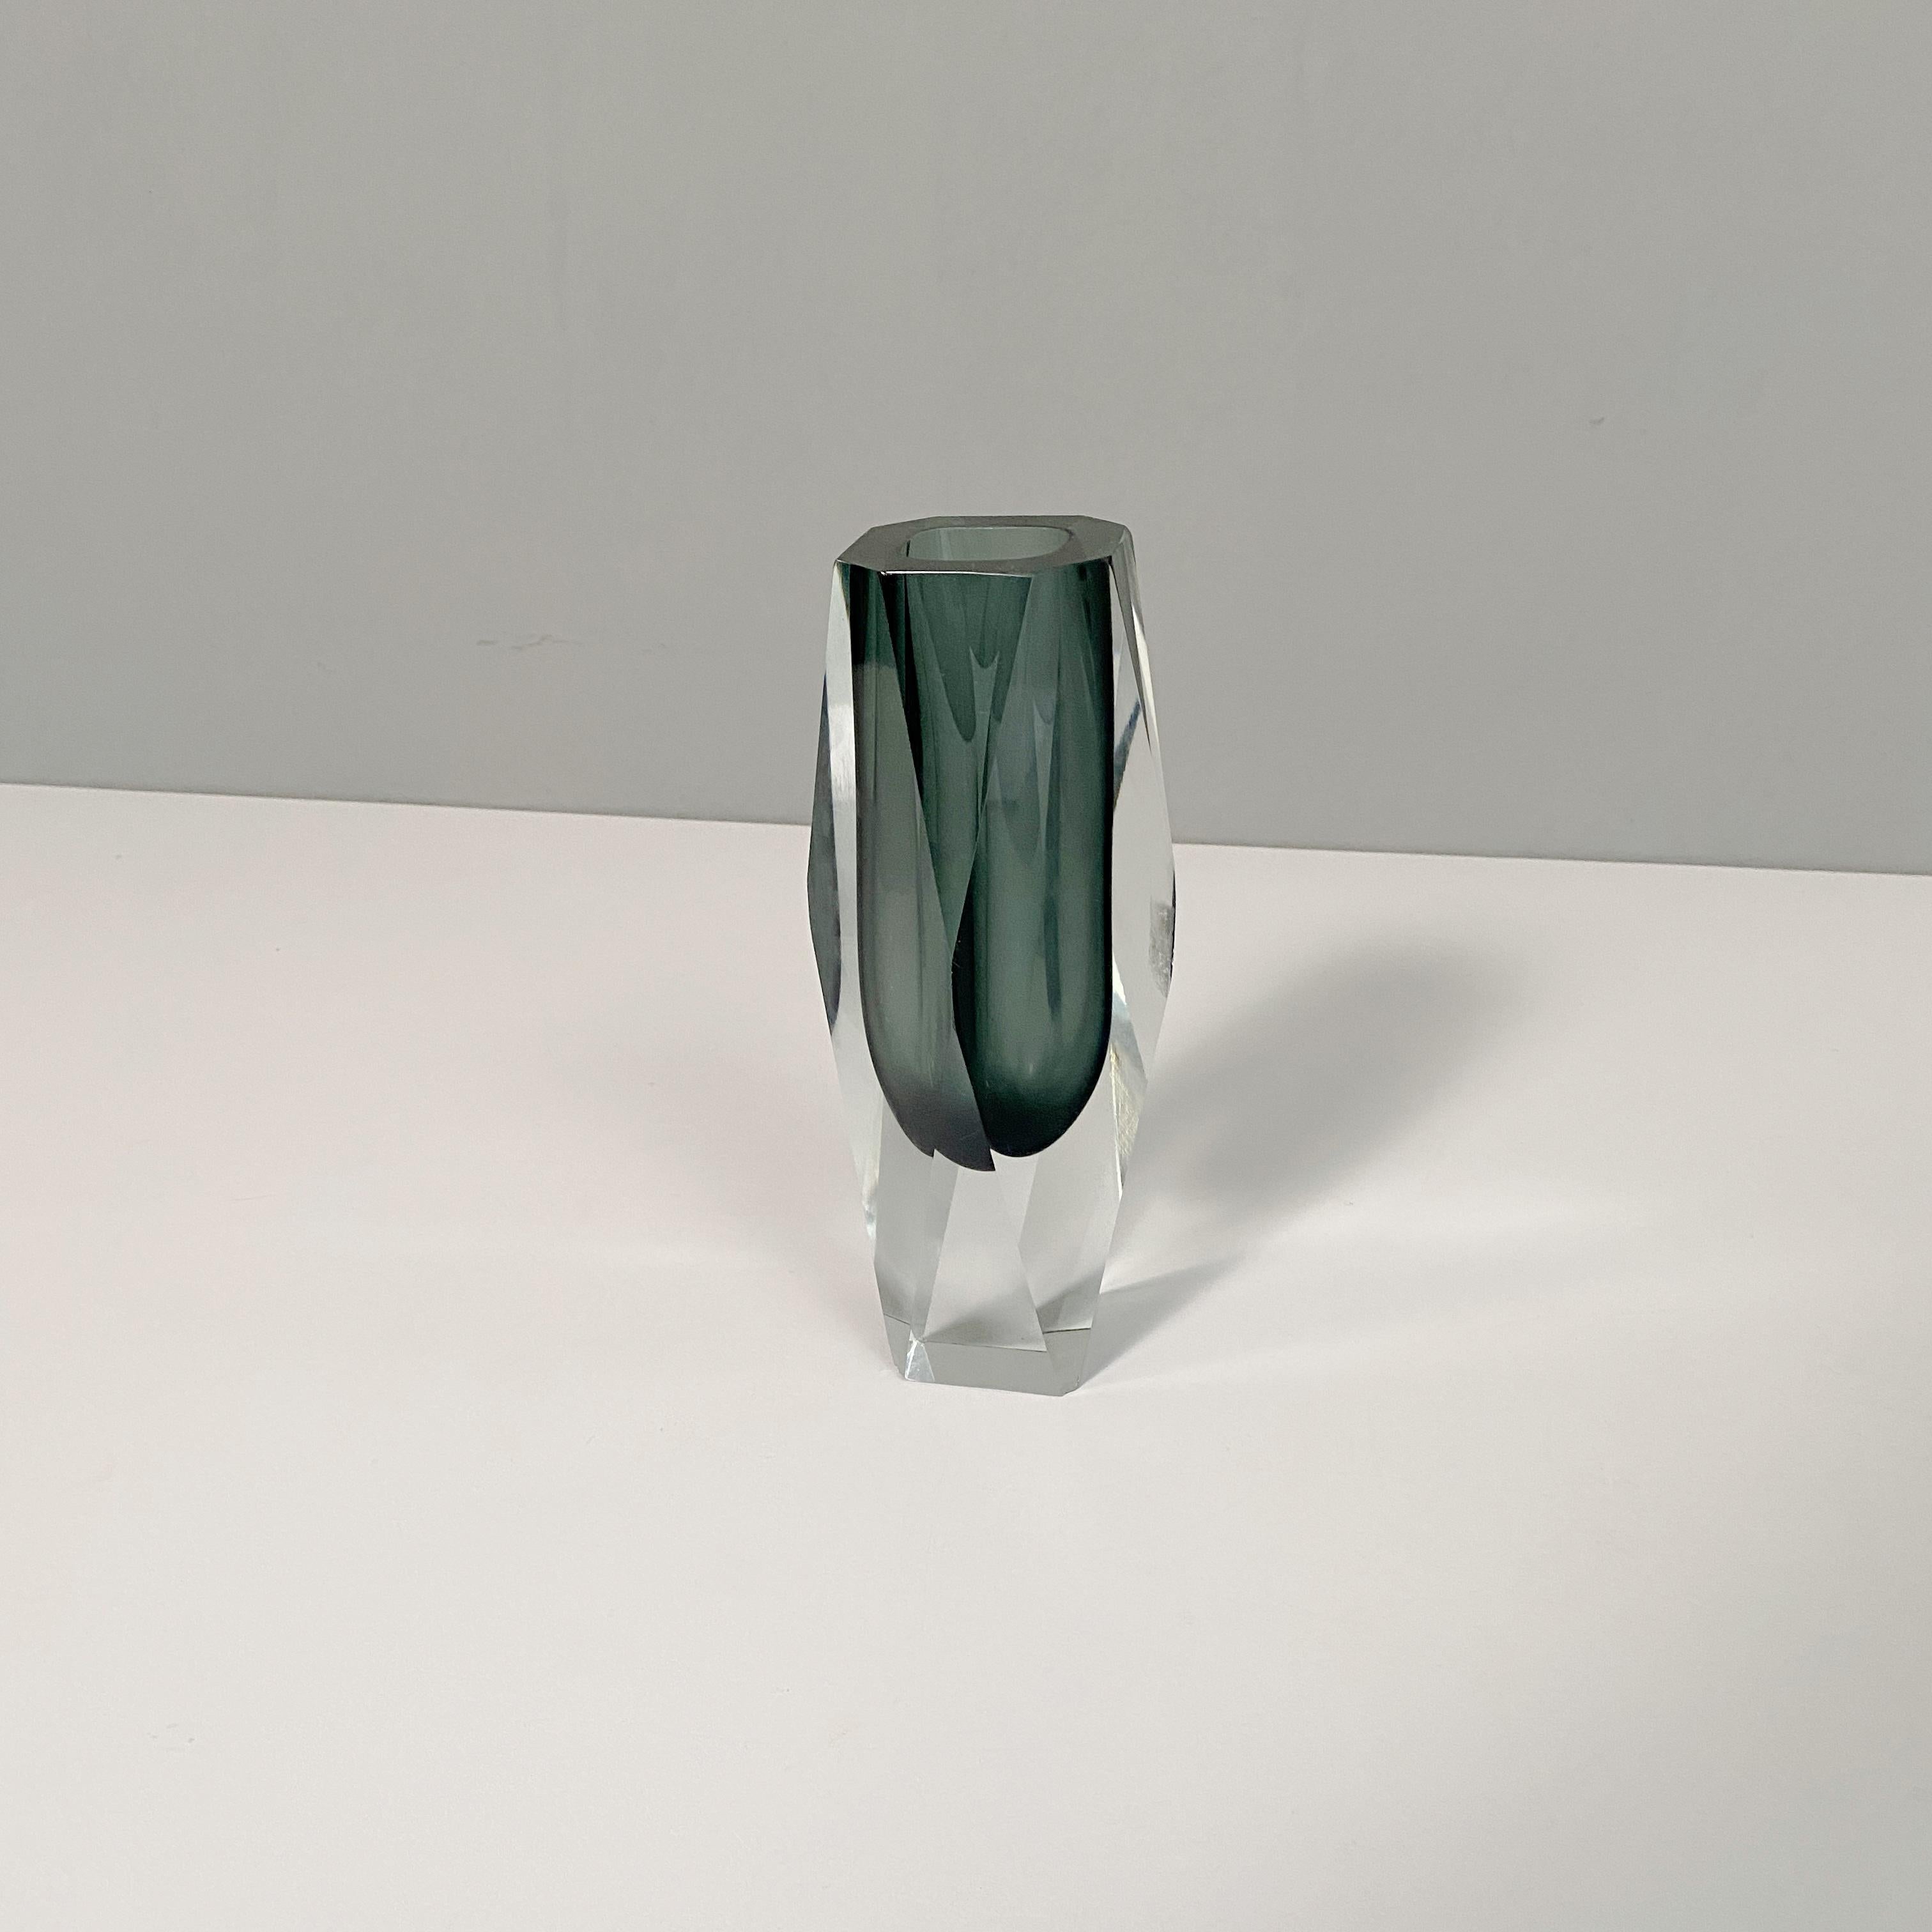 Gray Murano glass vase, 1970s
Gray Murano glass vase from the I Sommersi series.

1970s 

This Fantastic series of Murano glass vase with various colored shades, is the 